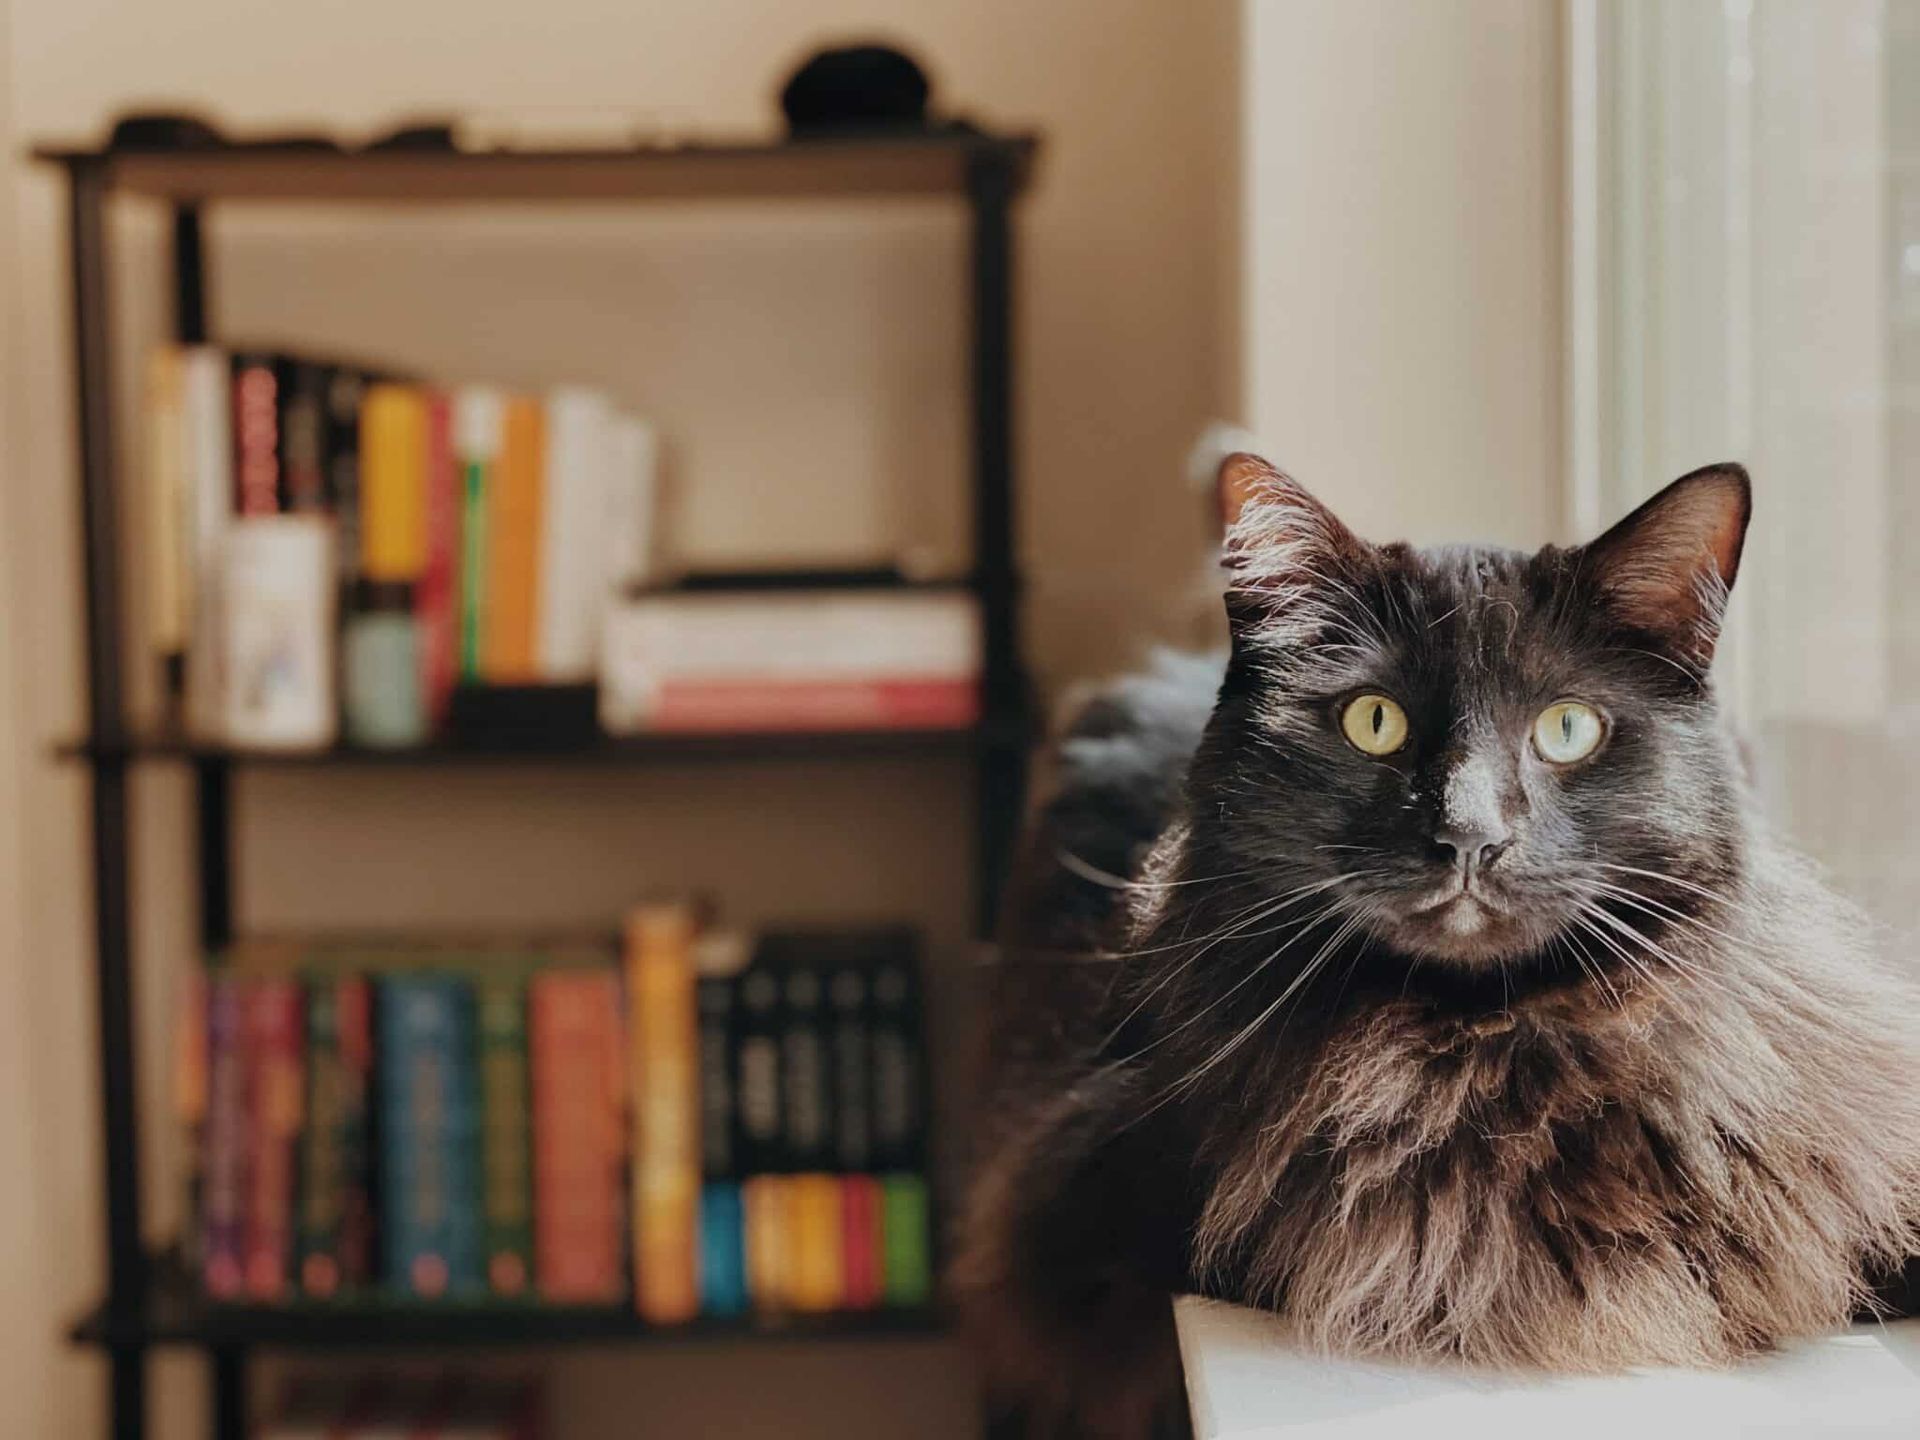 A black cat is sitting on a window sill in front of a bookshelf.